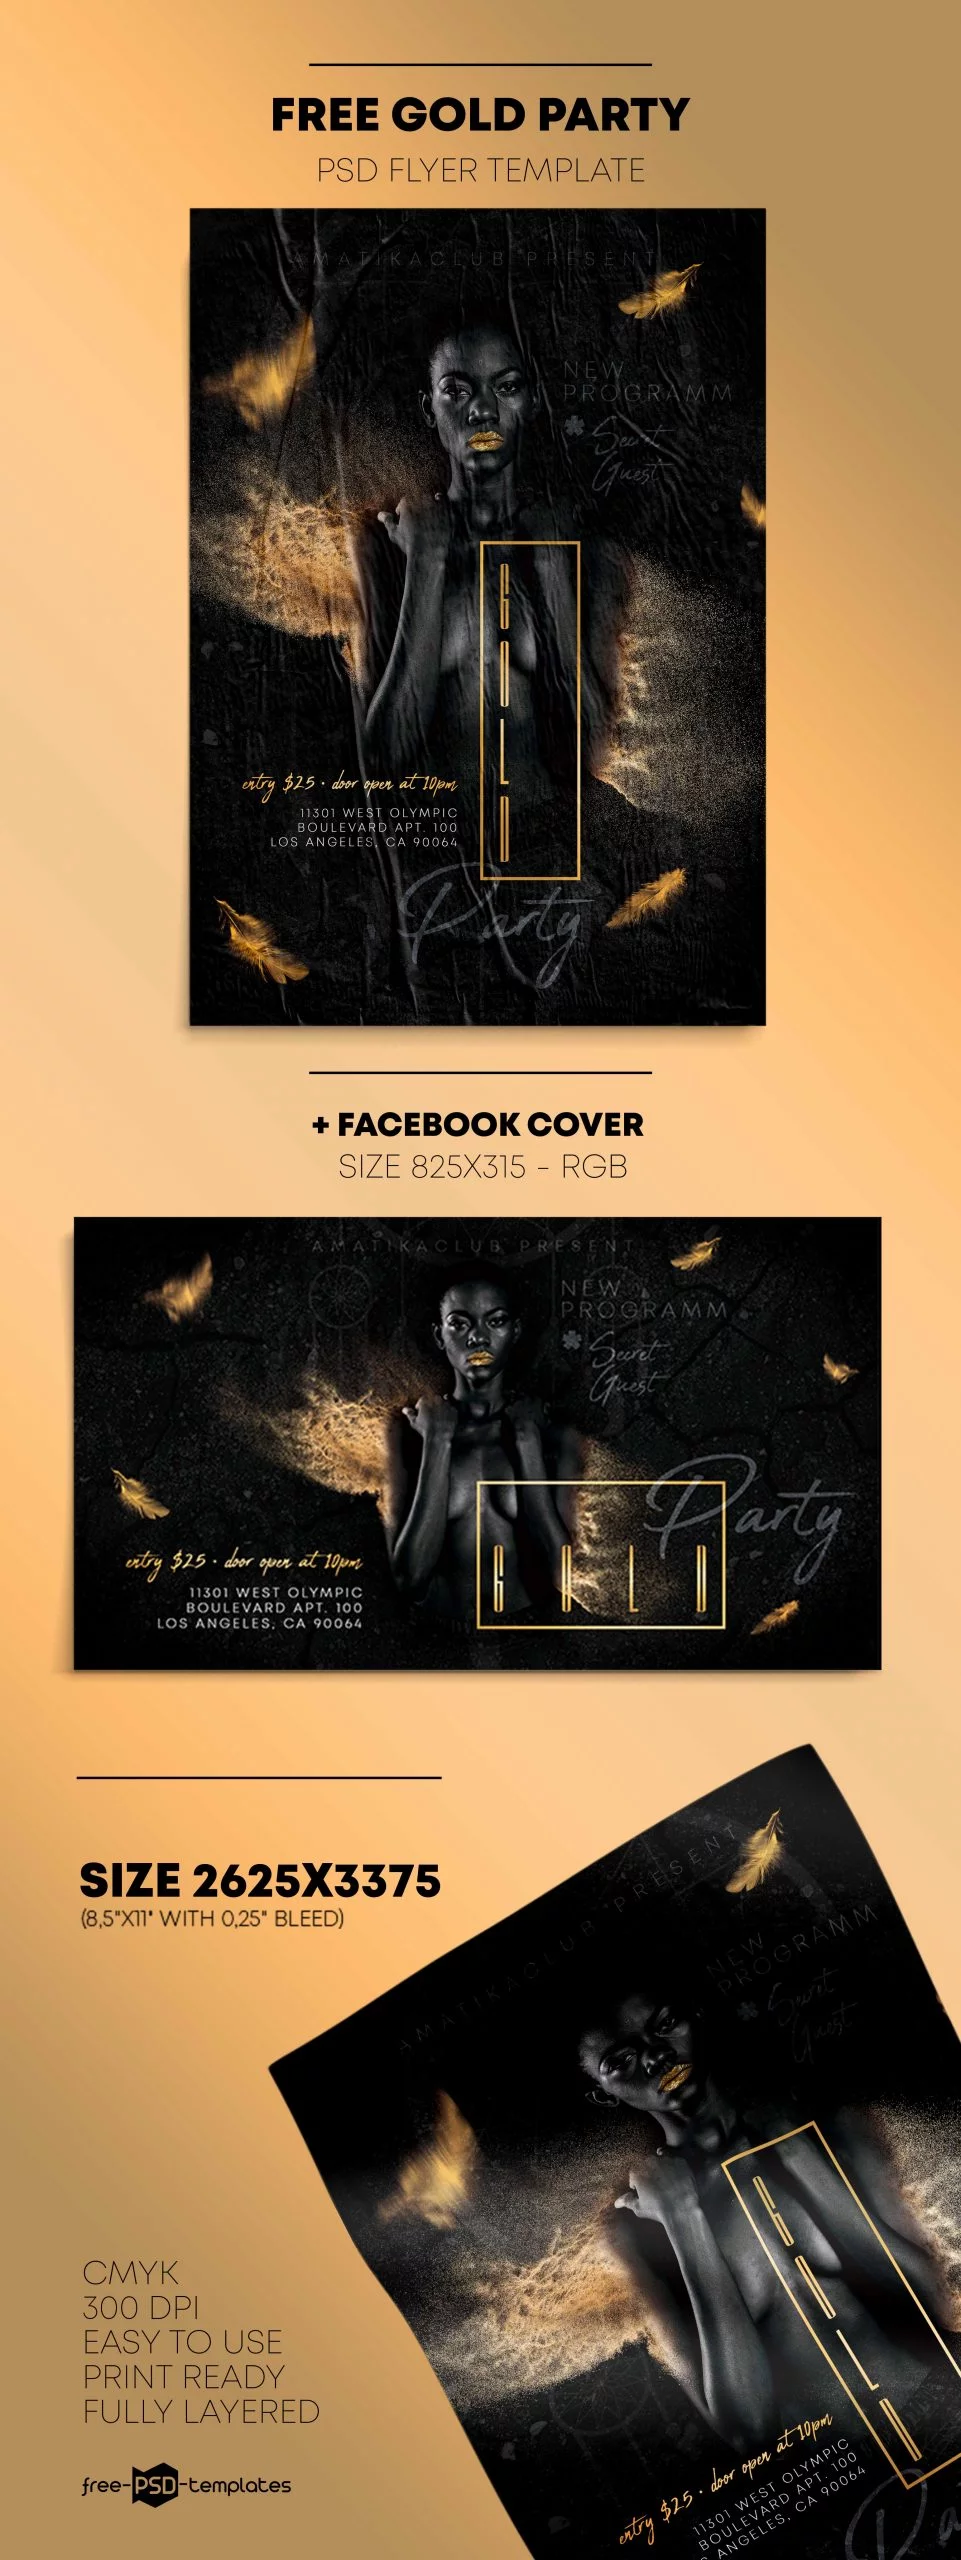 Free Gold Party Flyer Template (PSD)